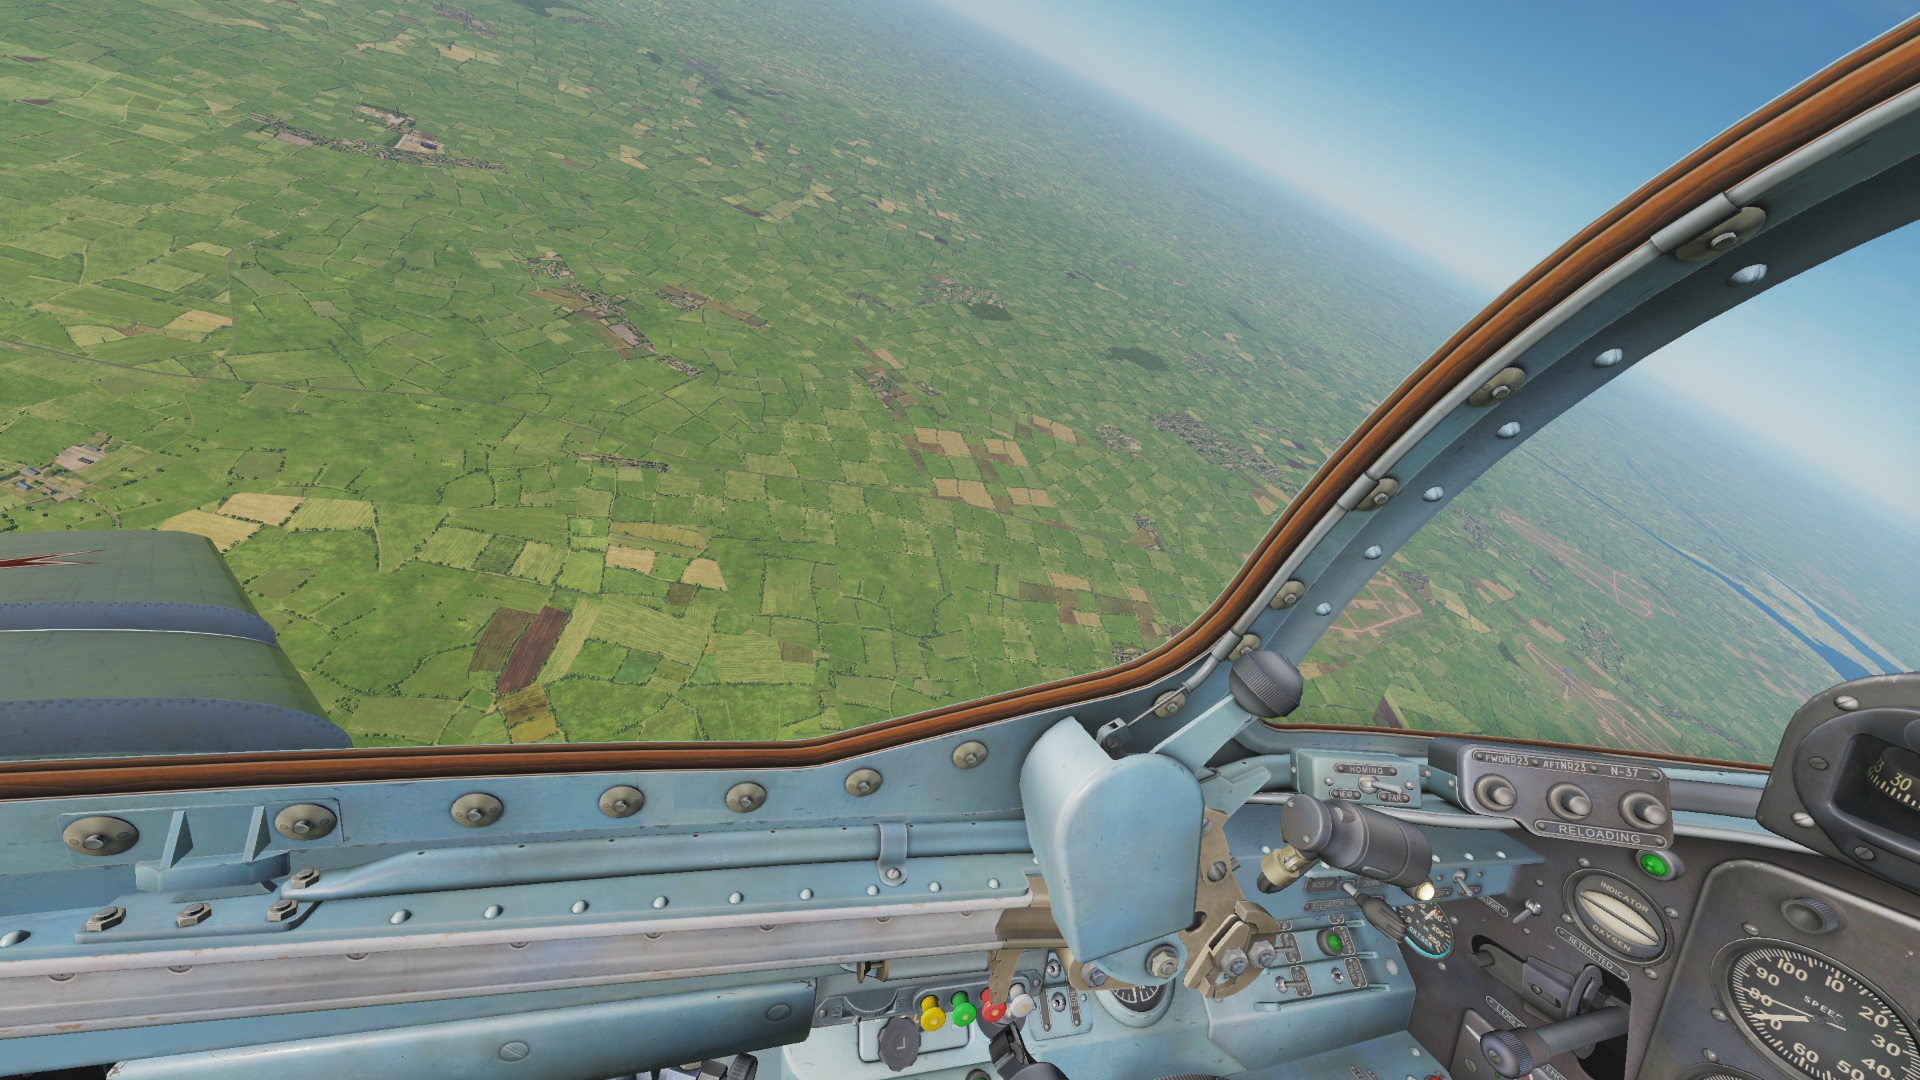 MiG-15 clean cockpit without reflections